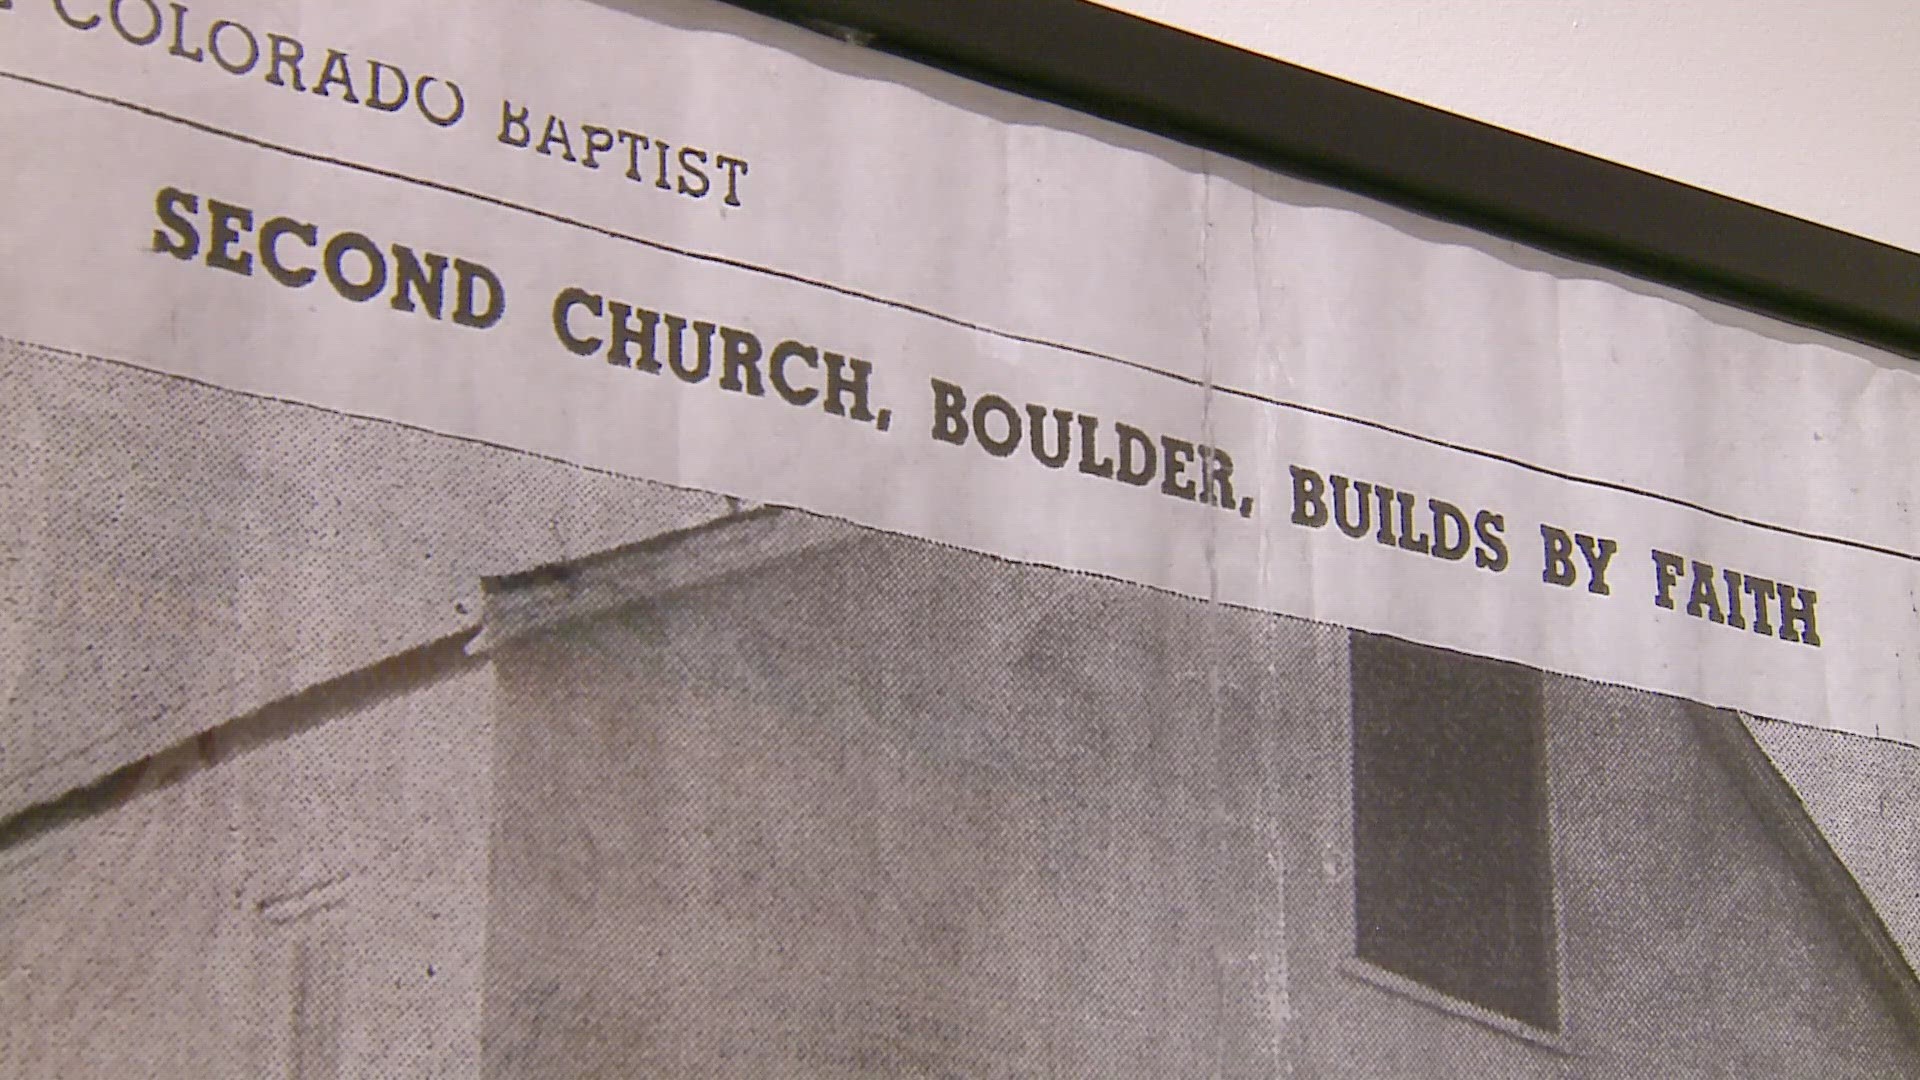 One part of the exhibit focuses on one of the oldest Black churches in Boulder.